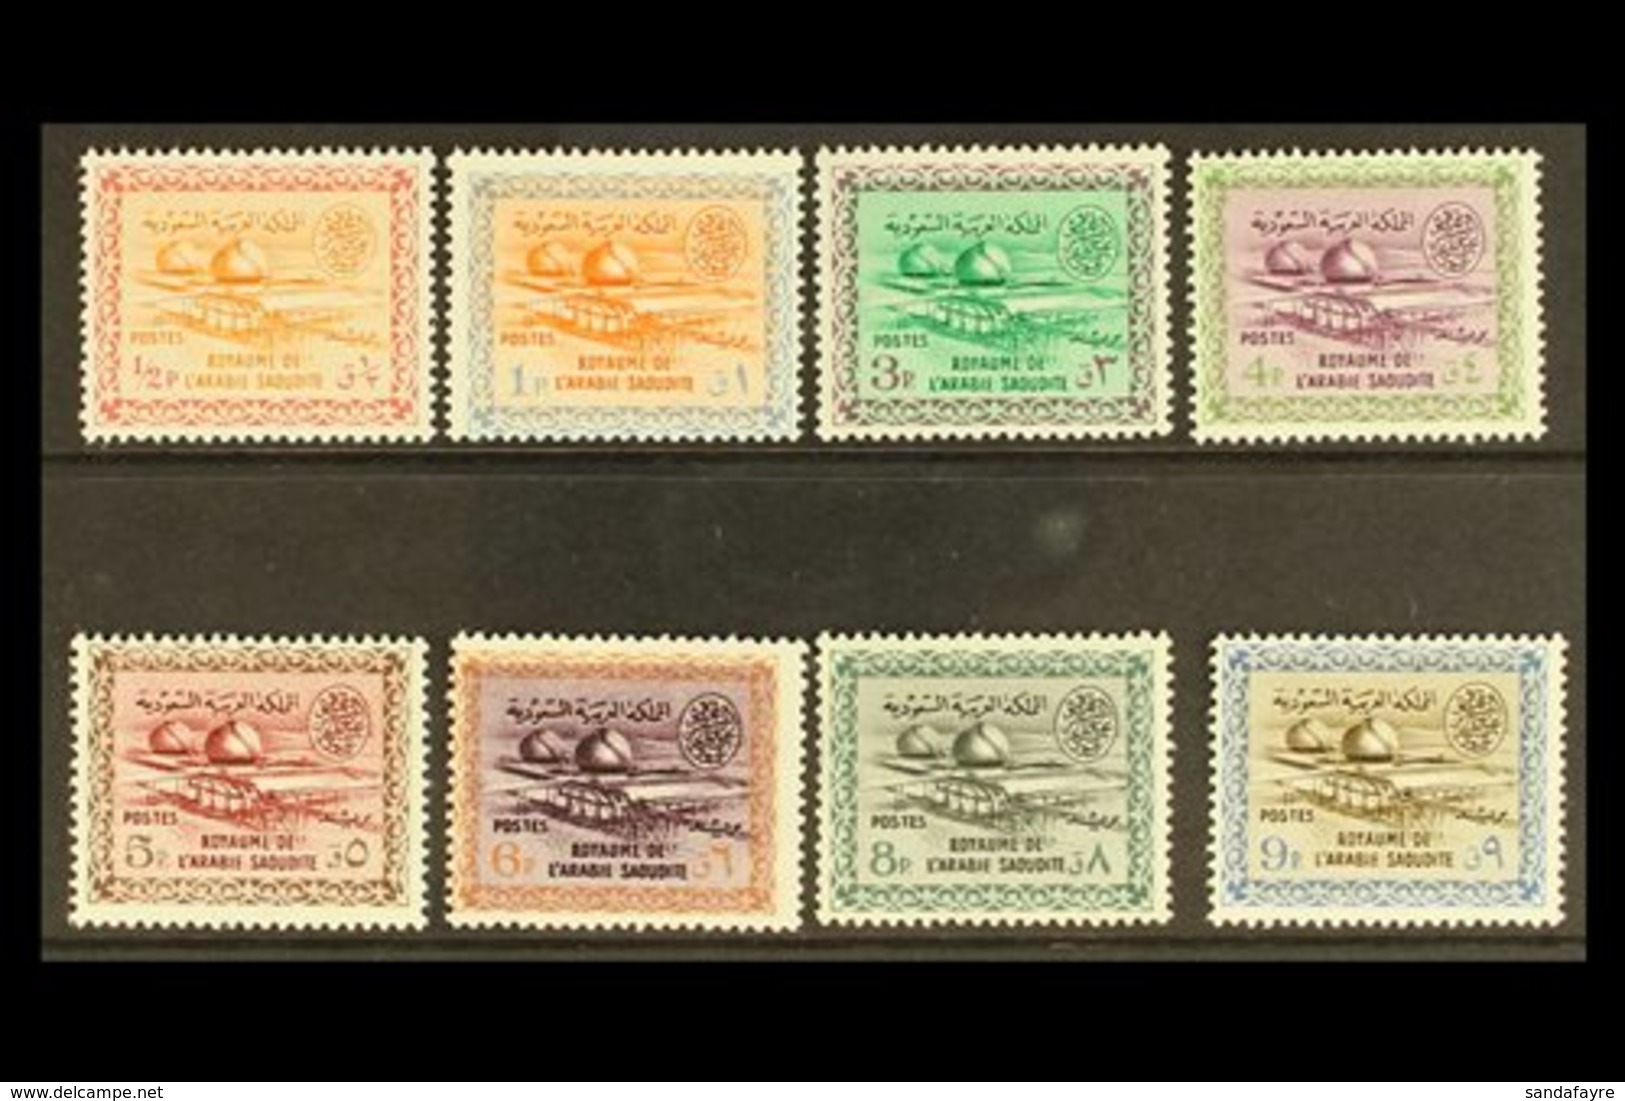 1963 - 65 Gas Oil Plant Set With Wmk, Complete, SG 467/74, Very Fine Never Hinged Mint. (8 Stamps) For More Images, Plea - Saudi Arabia